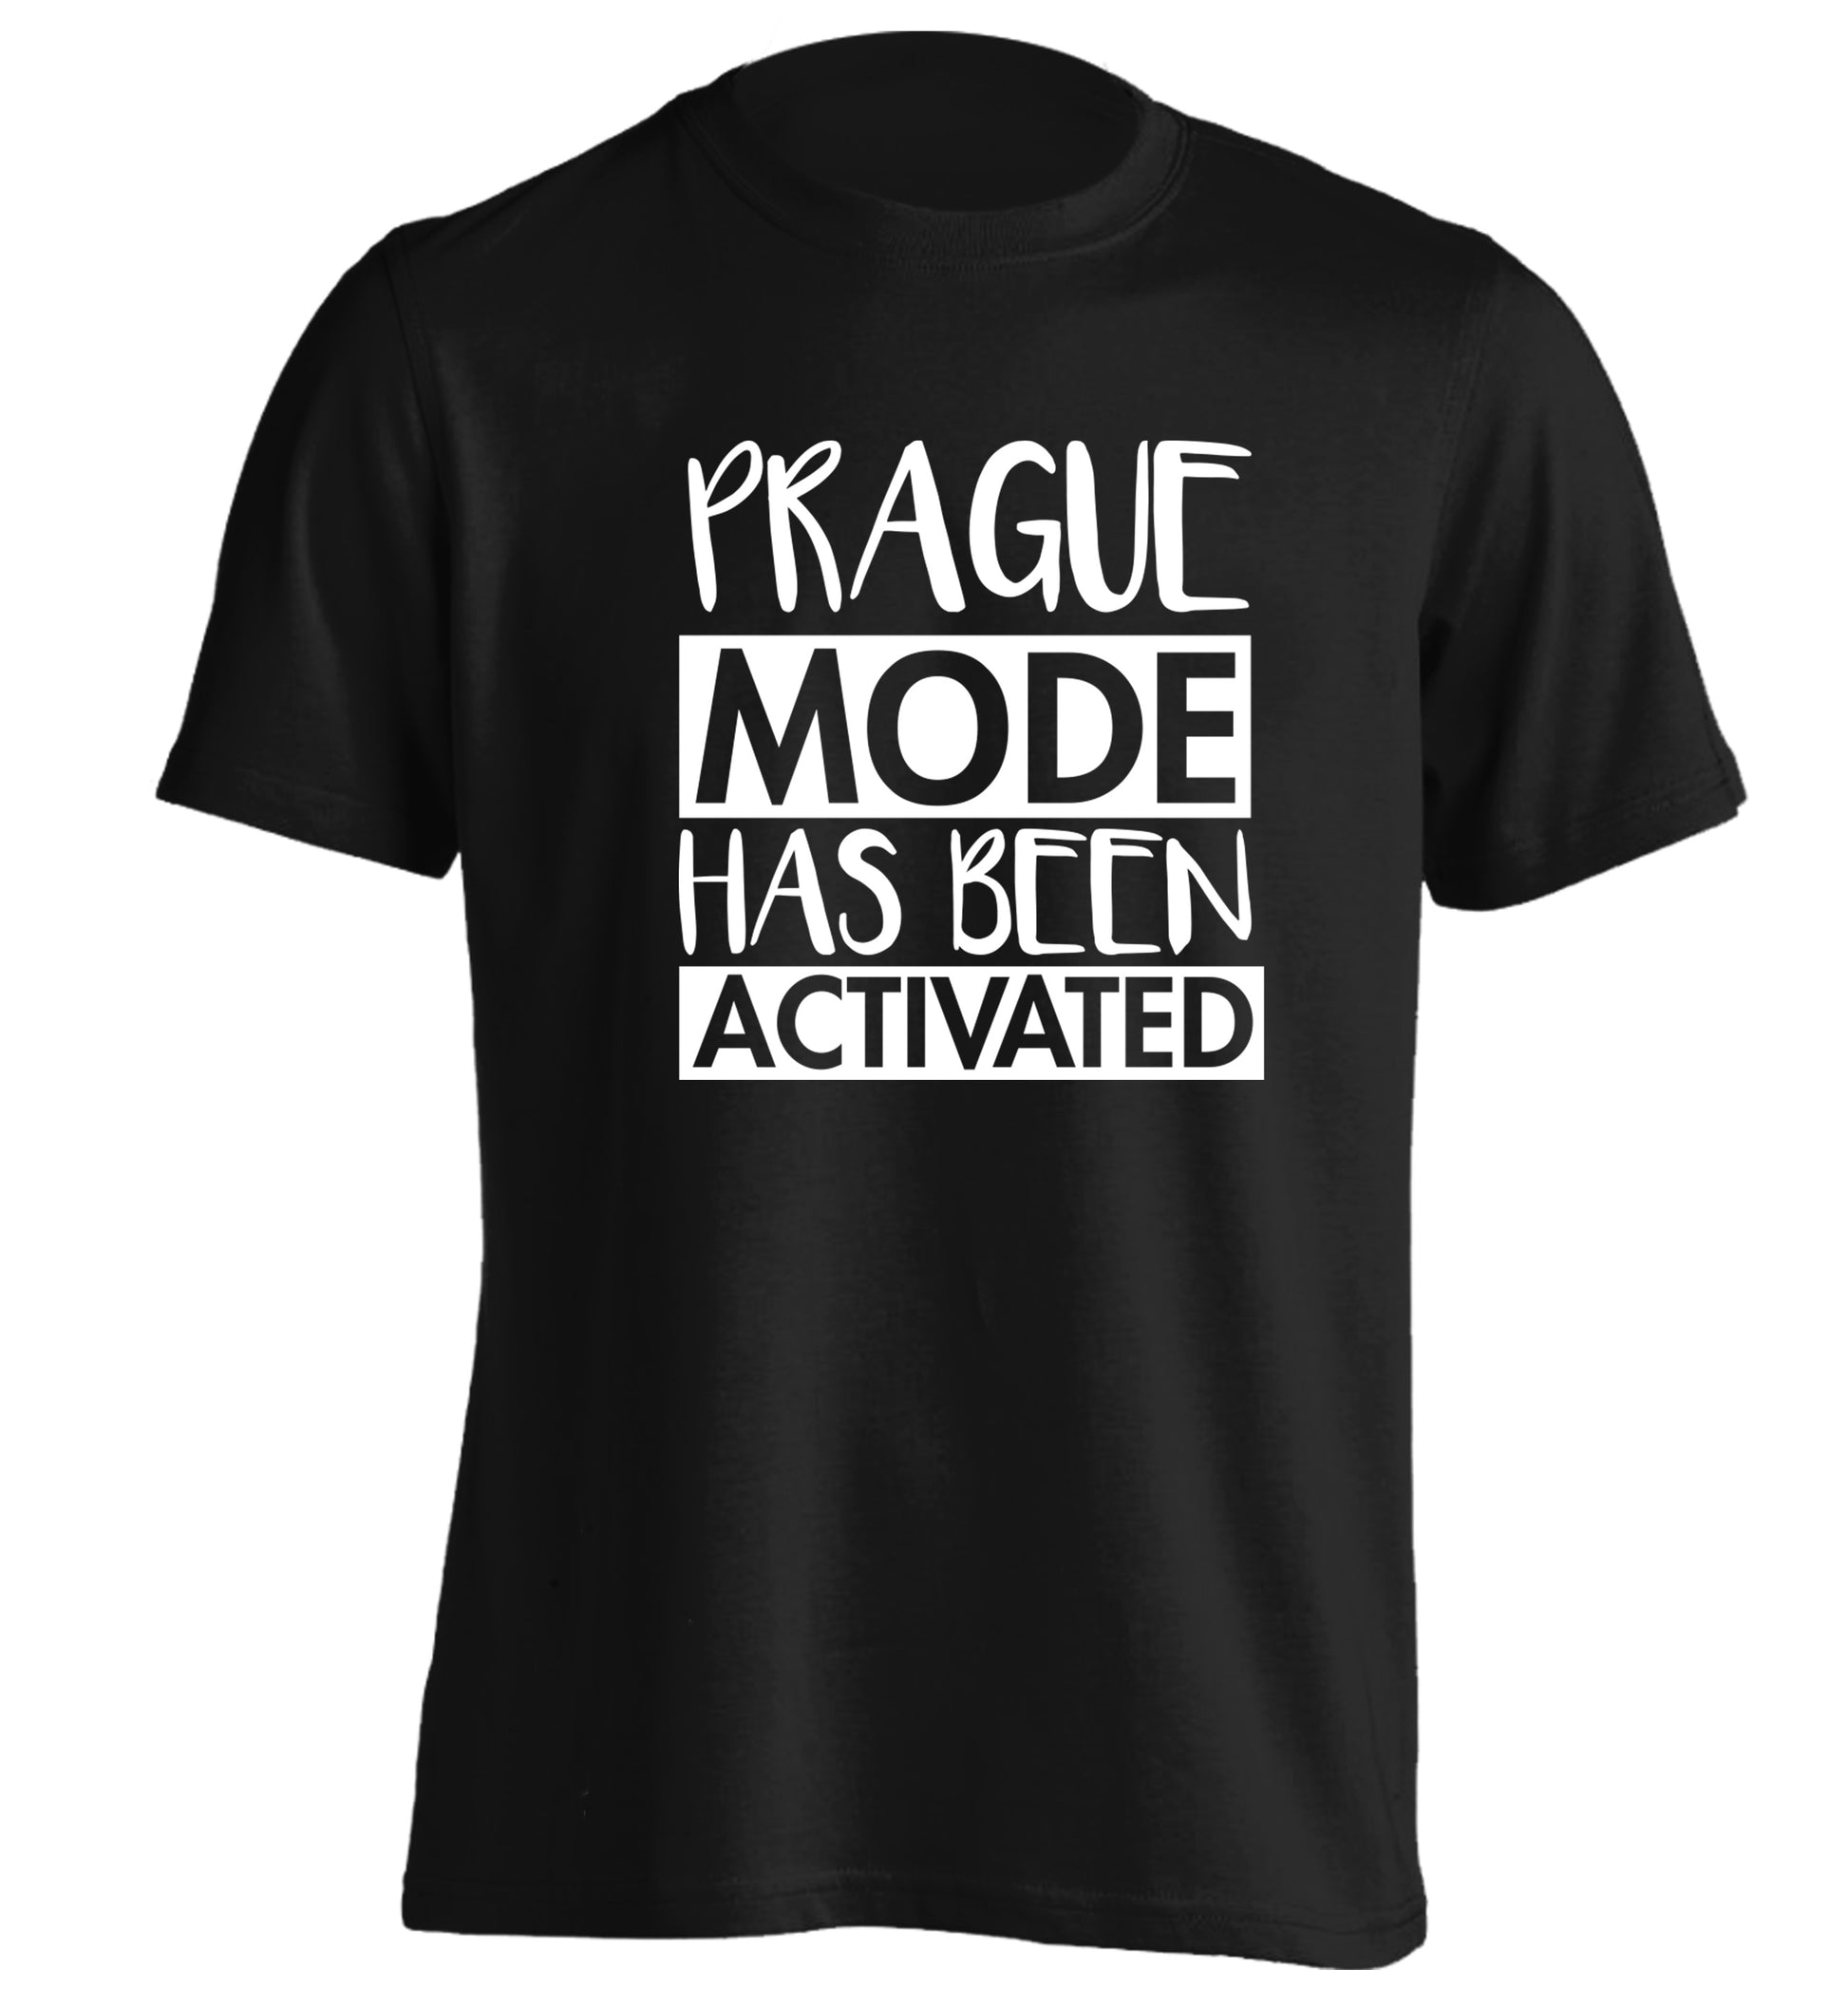 Prague mode has been activated adults unisex black Tshirt 2XL